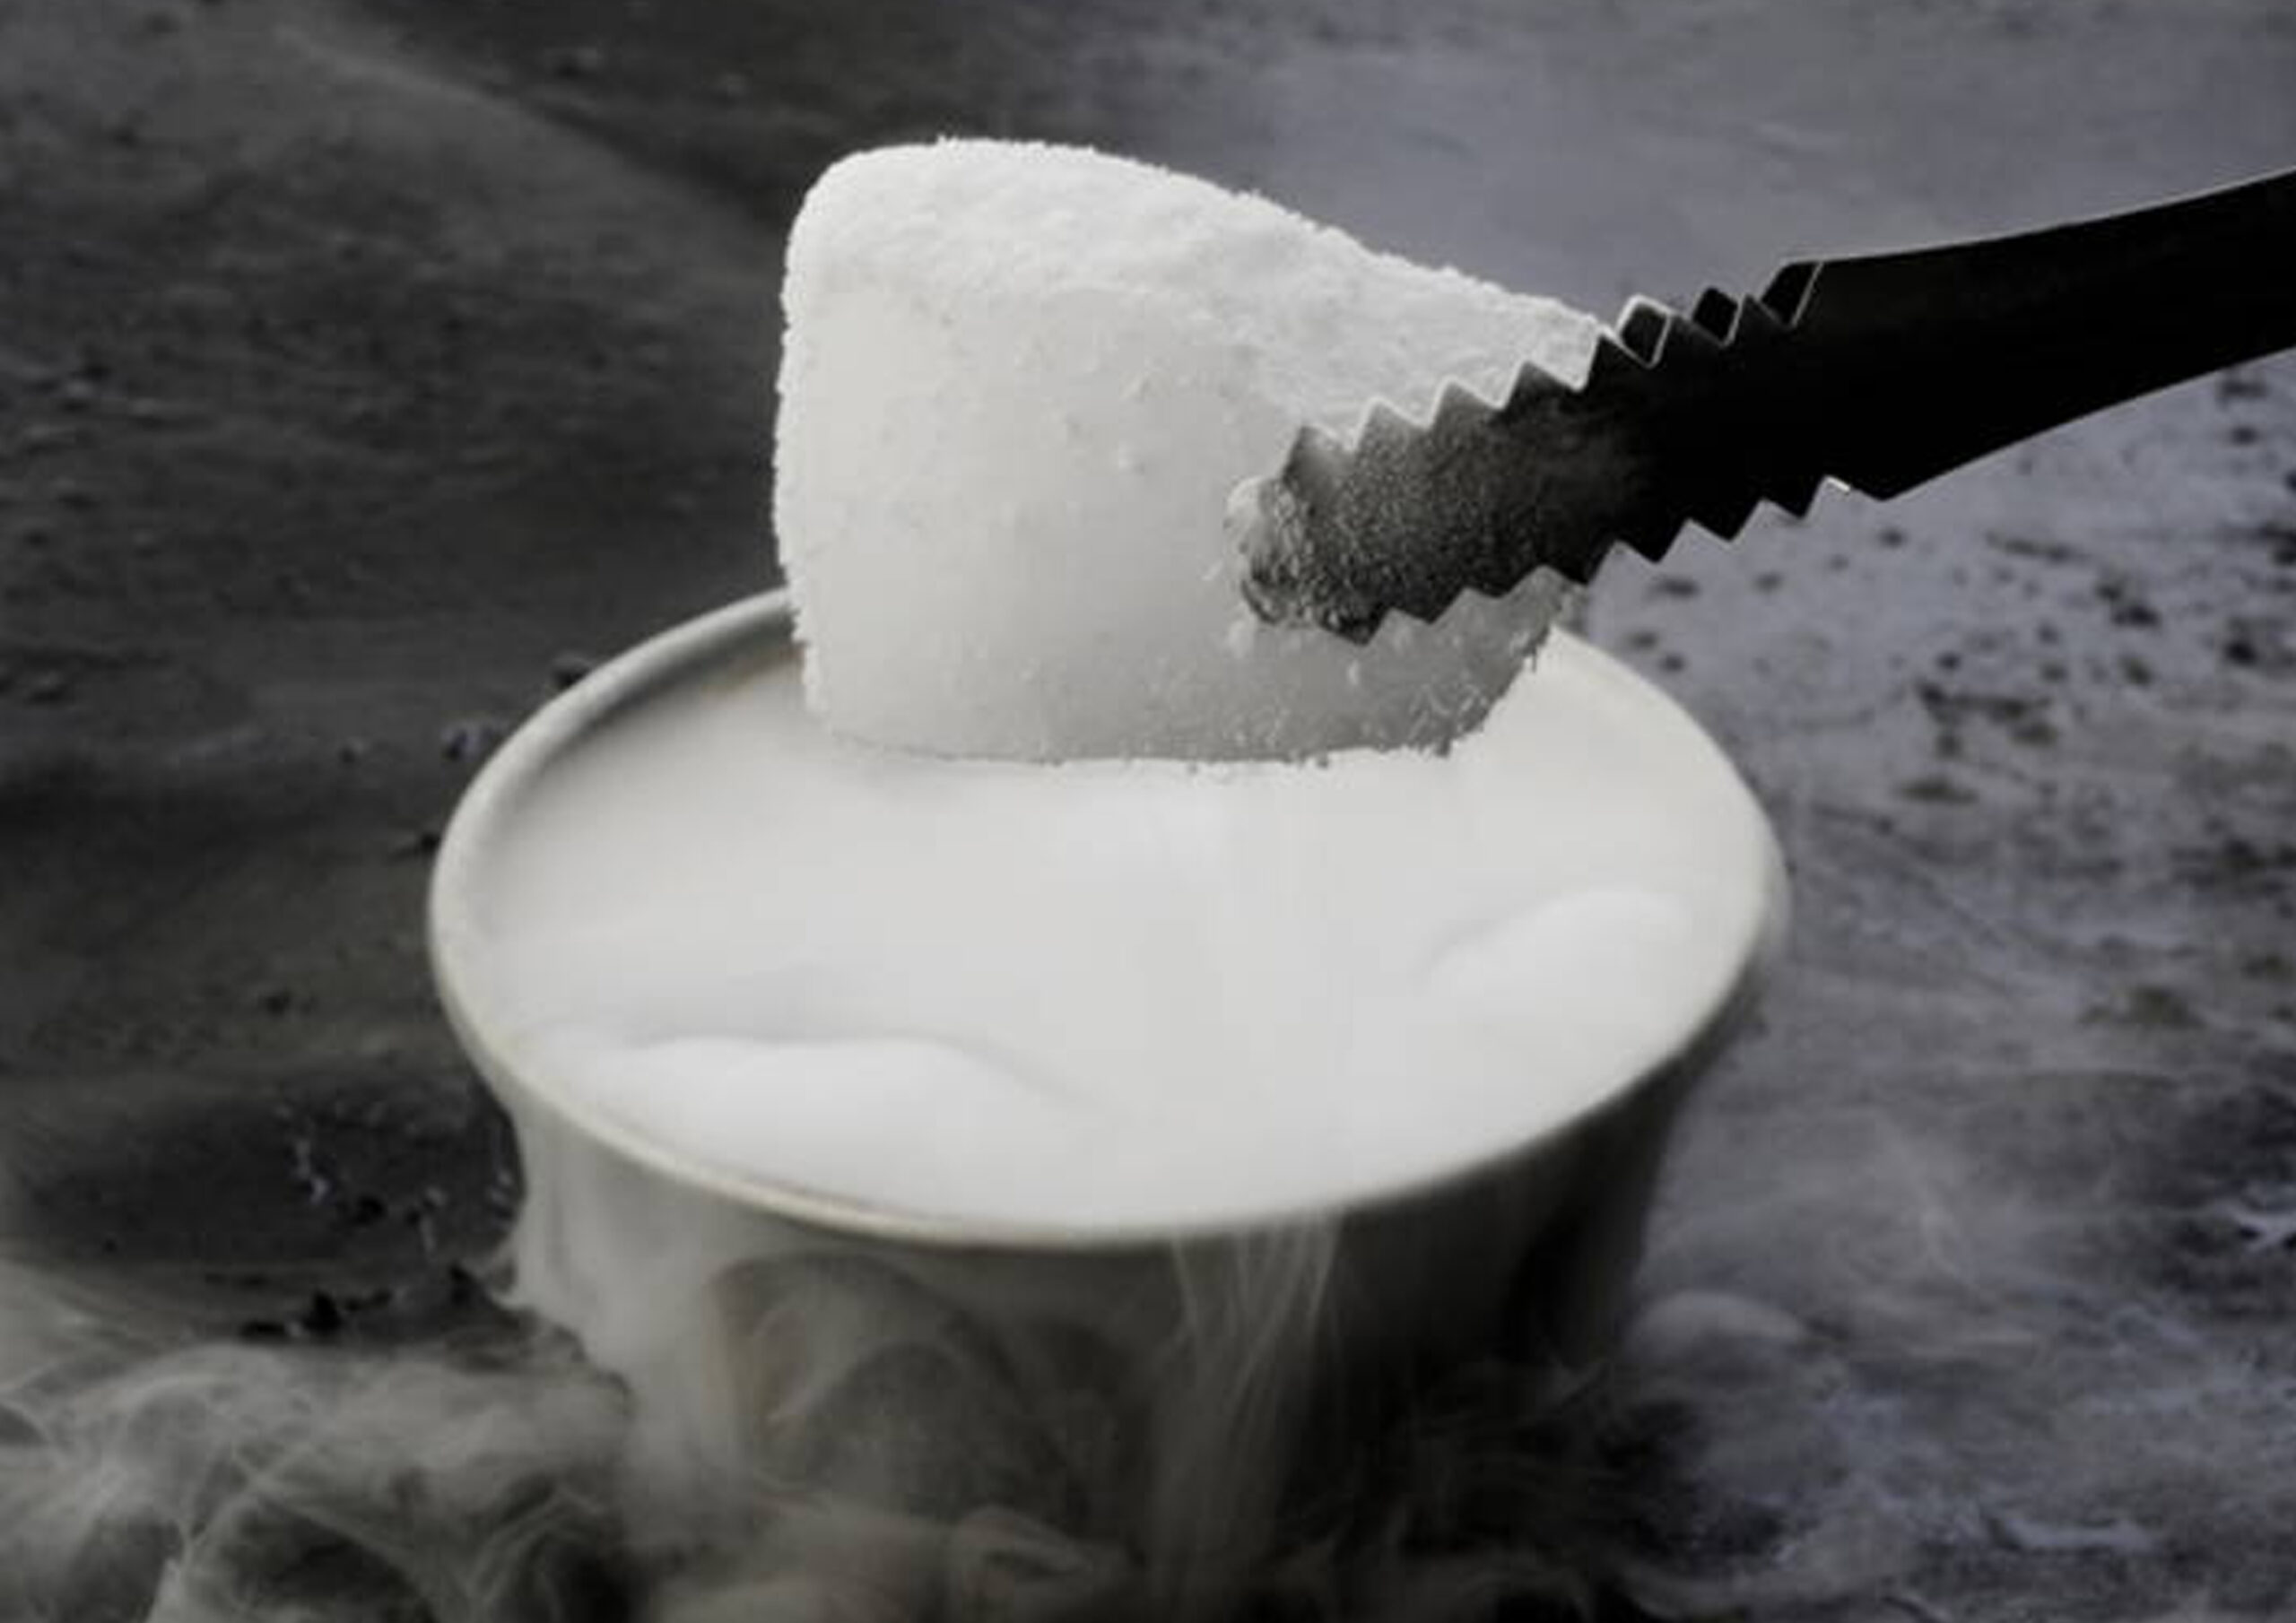 10 Cool Dry Ice Facts